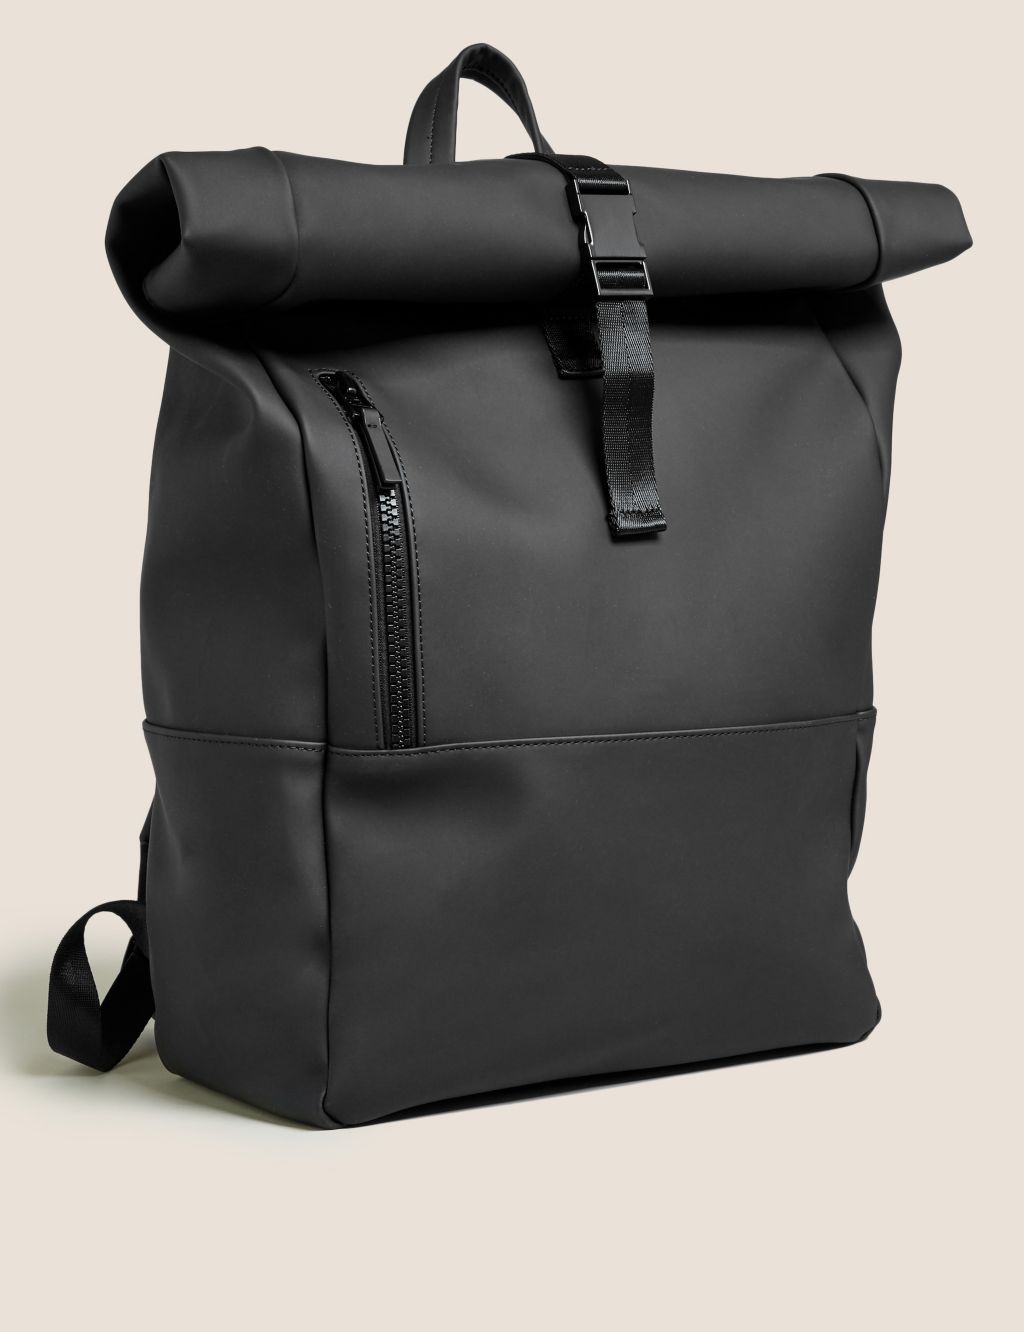 Rubberised Rolltop Backpack image 2